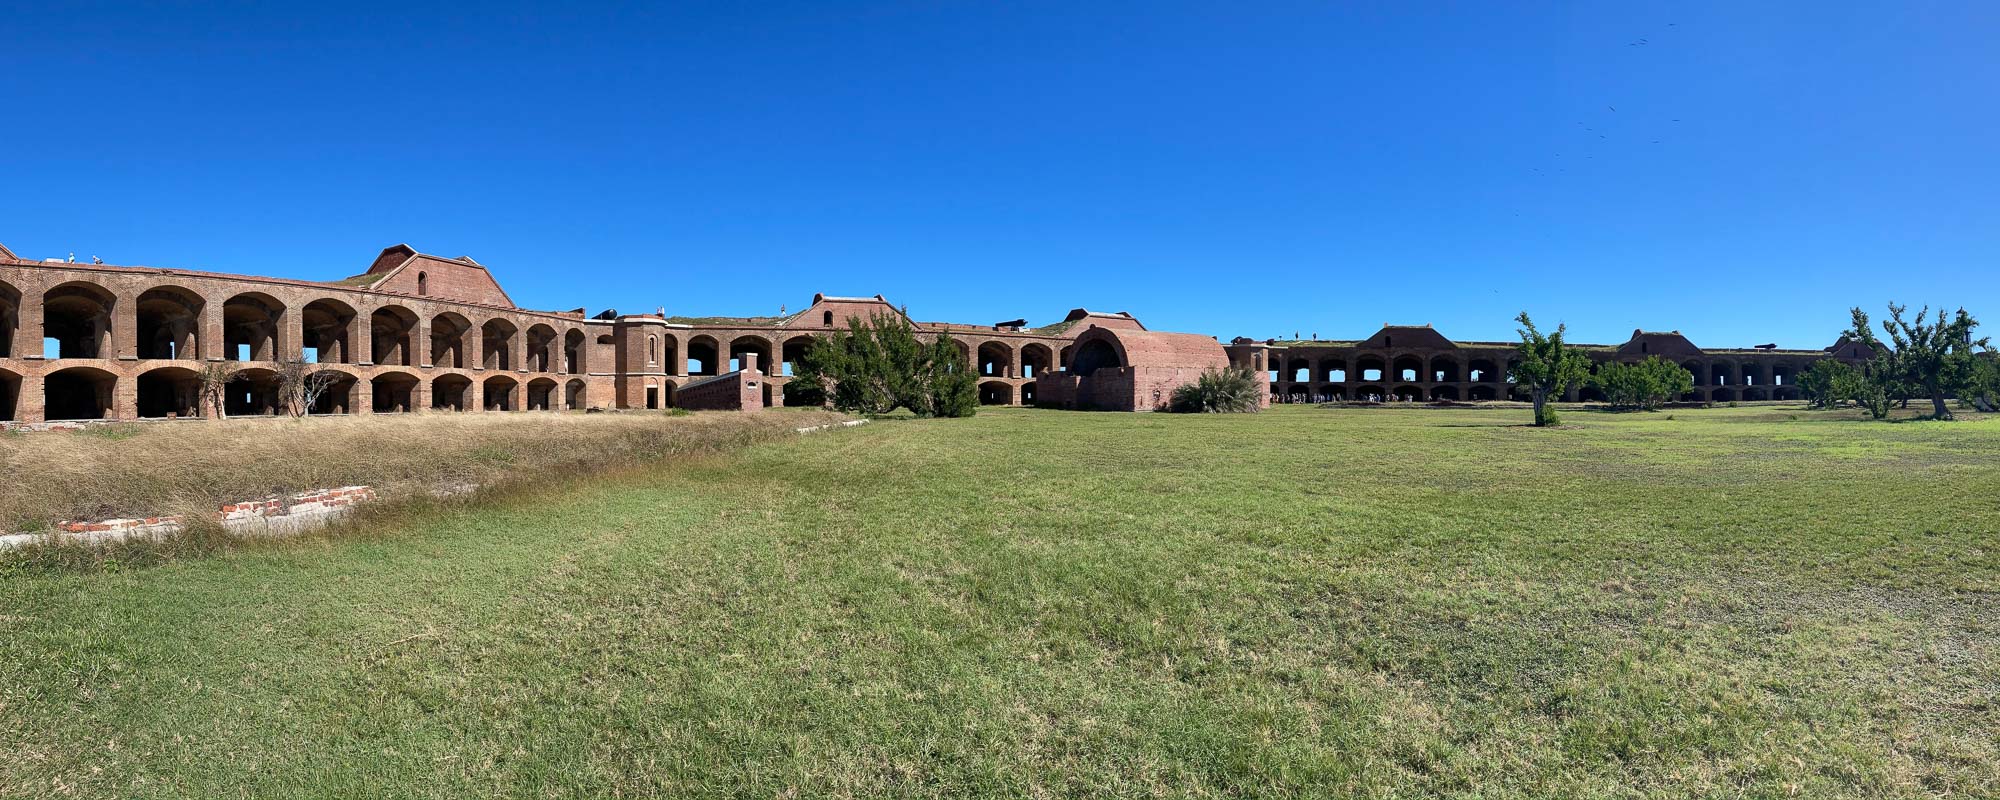 Fort Jefferson panorama in Dry Tortugas National Park, Florida